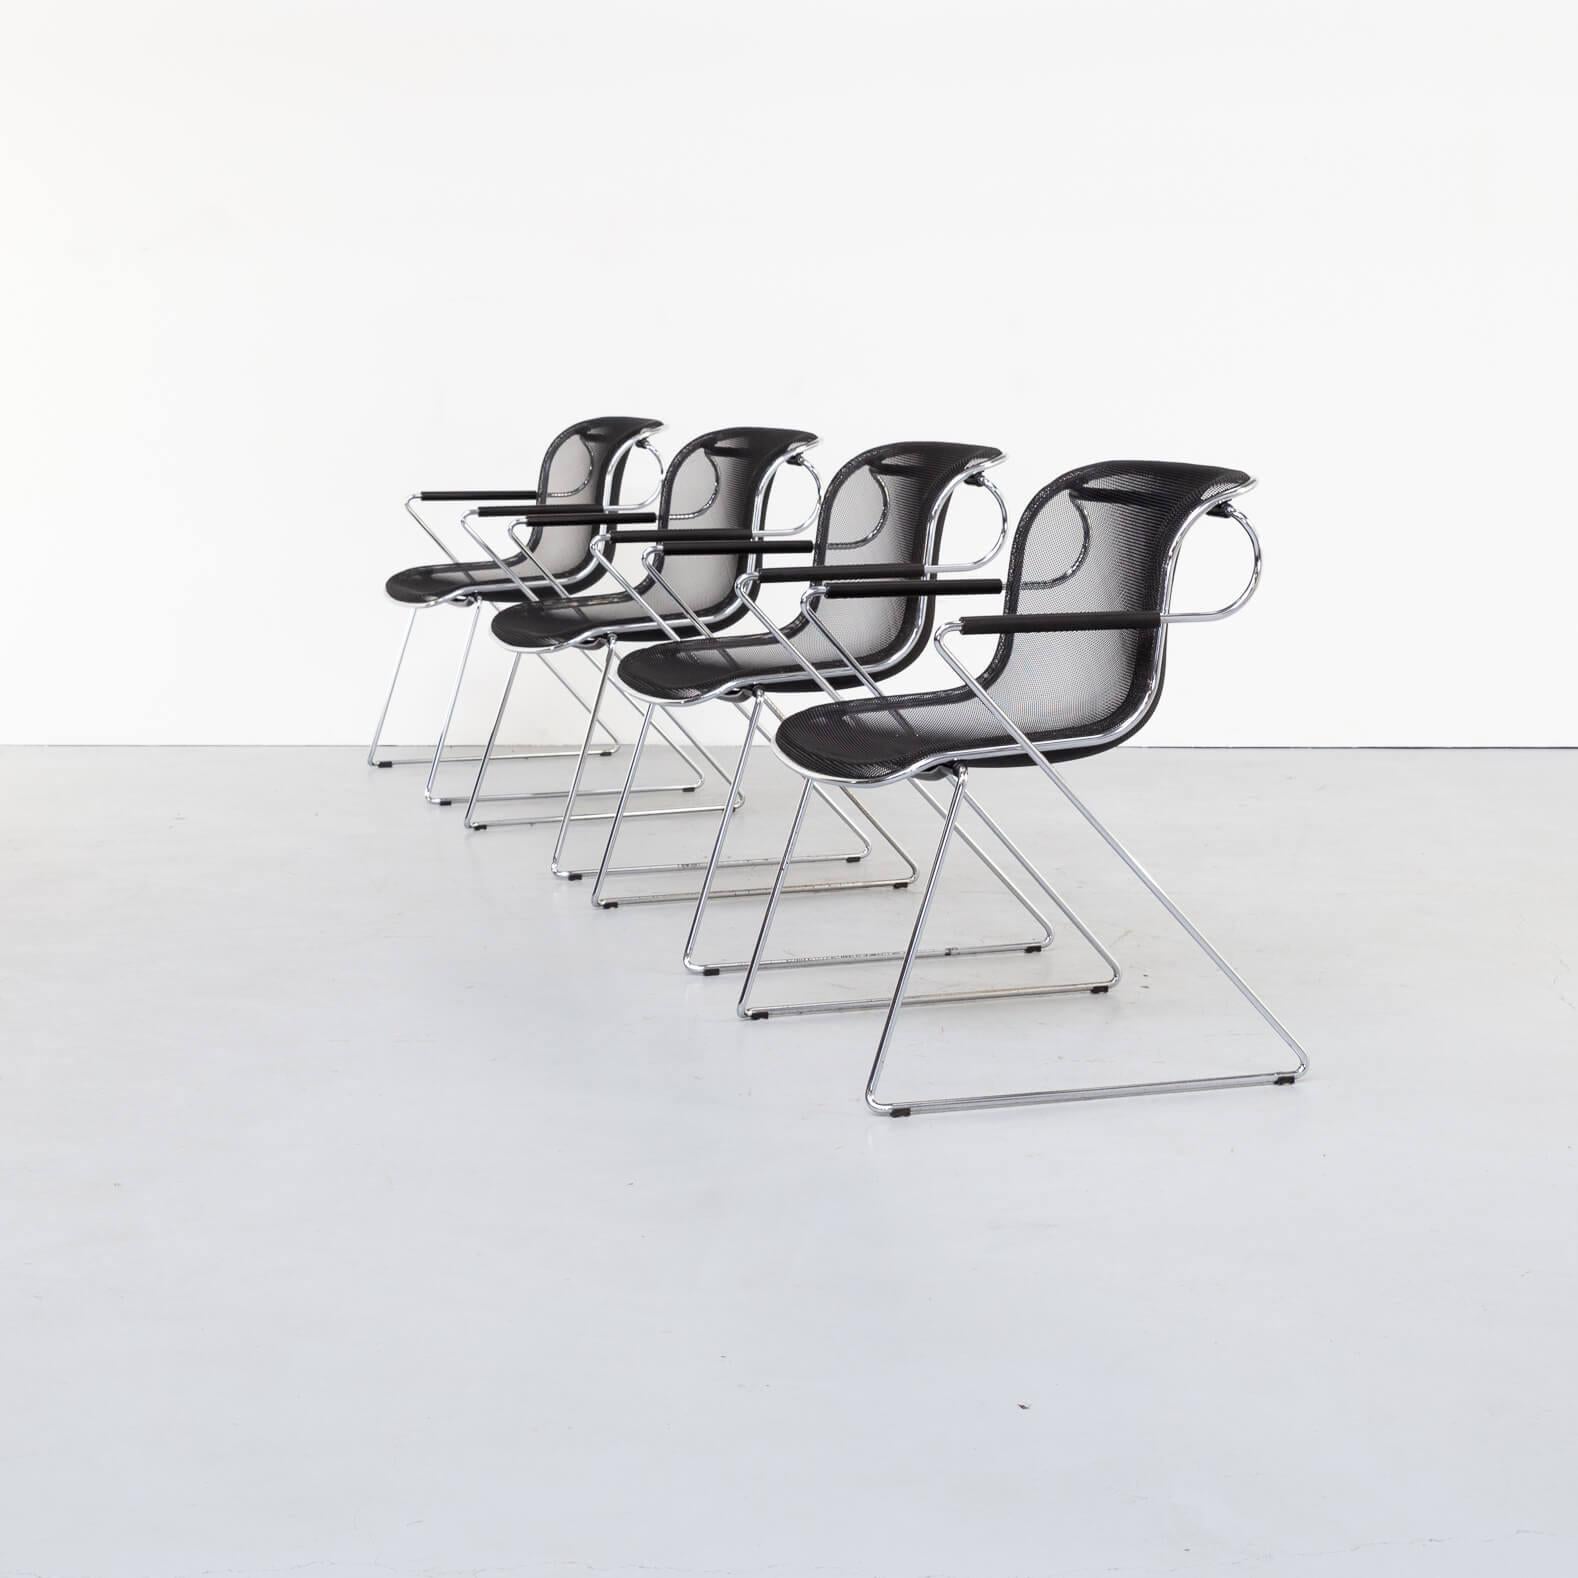 1982, the designer Charles Pollock created a real design classic: Penelope. The American designer developed for Castelli a revolutionary chair from a technical and formal point of view: a steel-wire sled base supports a seat permeable to air which